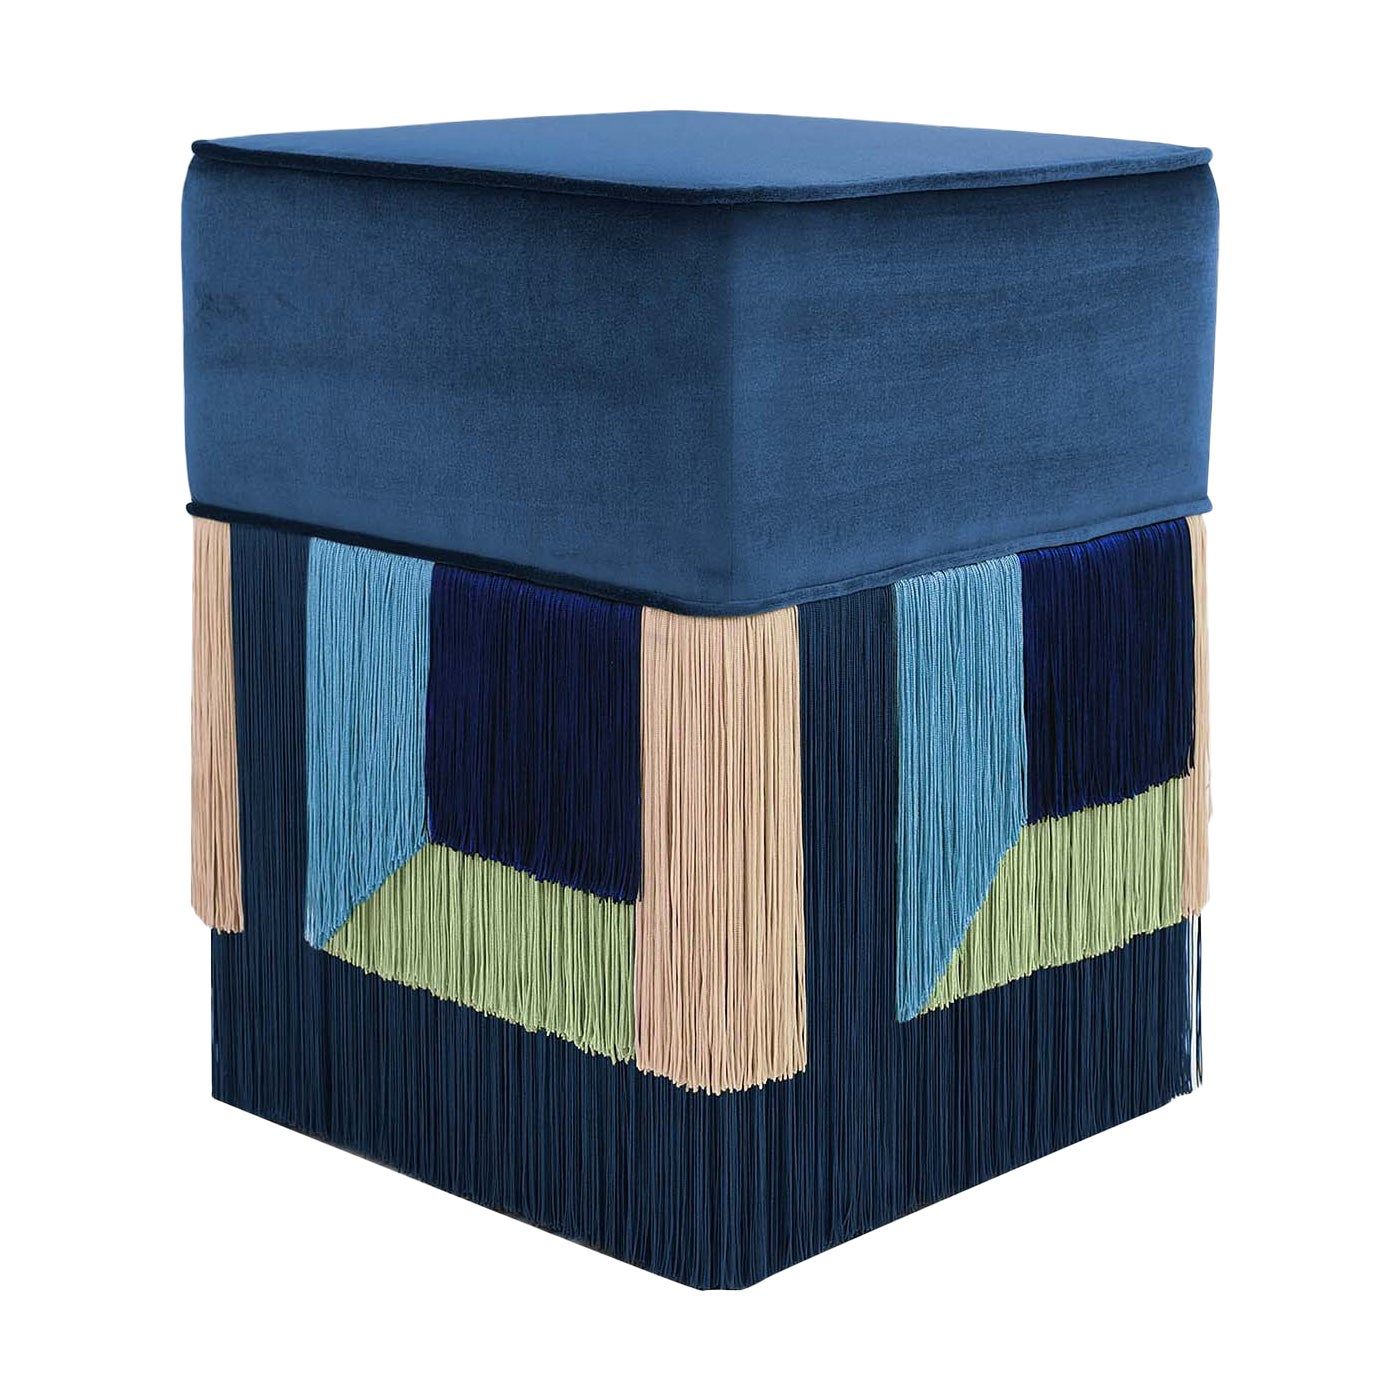 Couture Geometric Giò Purple Ottoman For Sale At 1stdibs Within Brushed Geometric Pattern Ottomans (View 1 of 20)